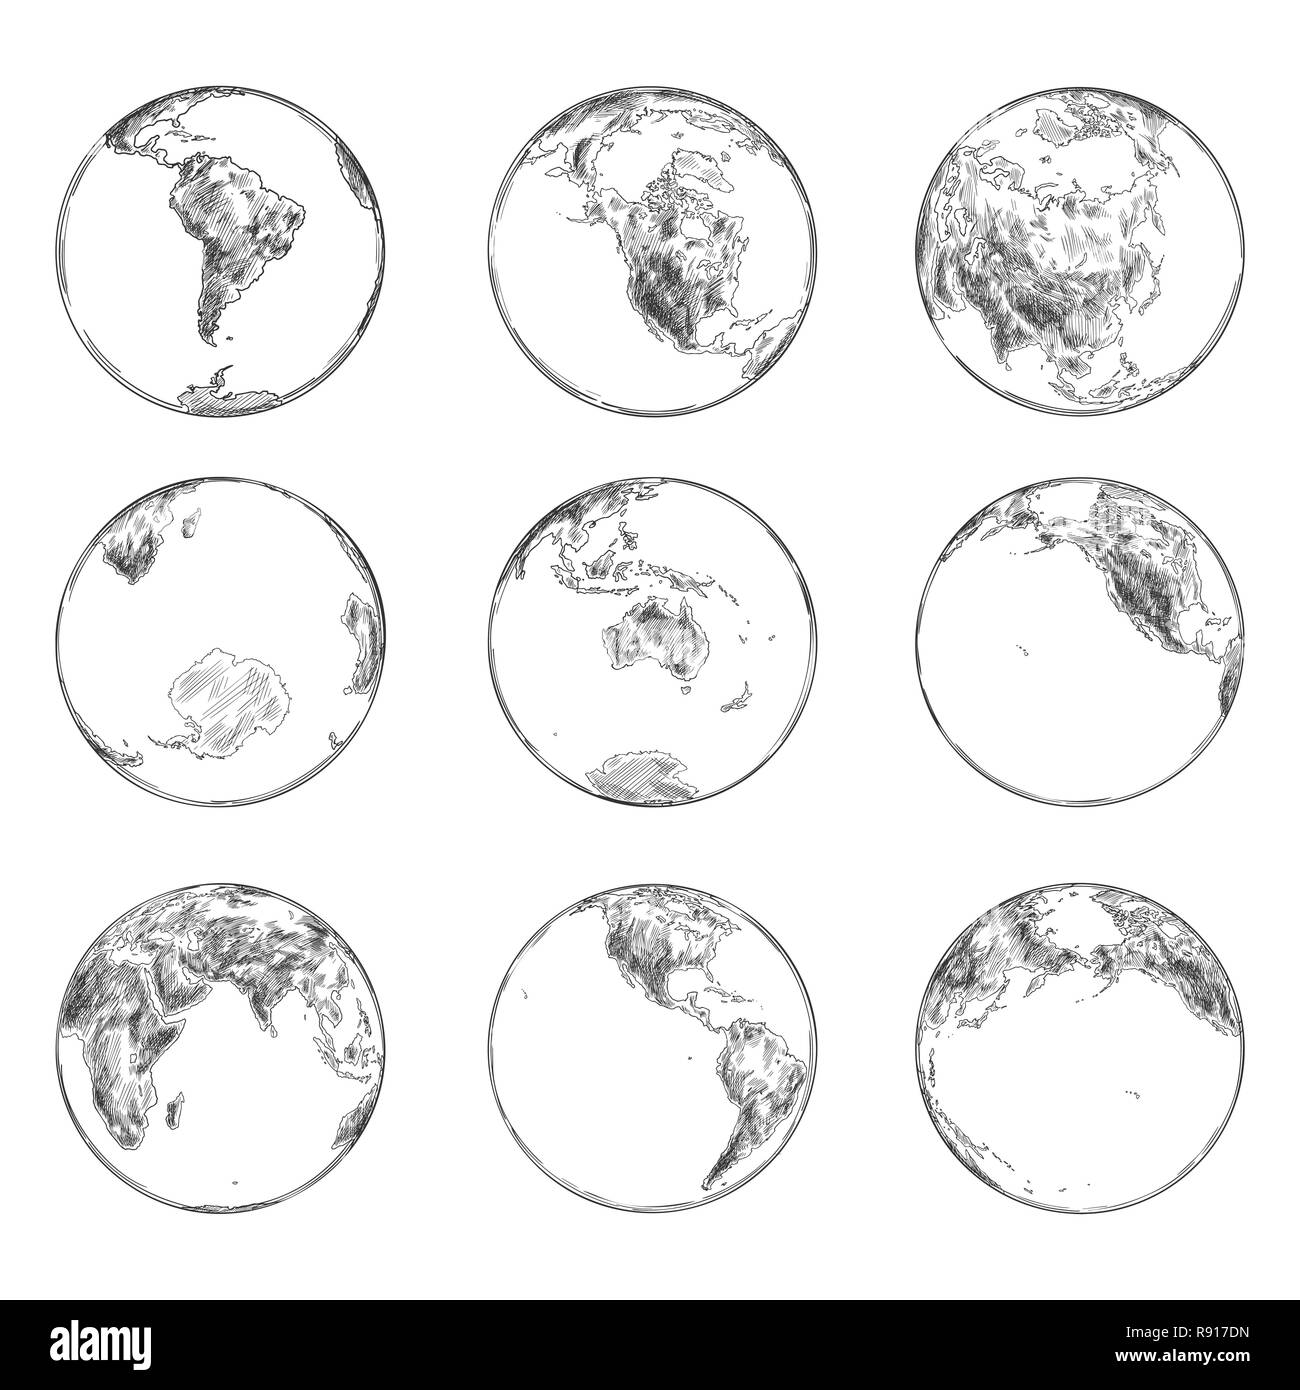 Sketches of continents on planet Earth.World ocean Stock Vector